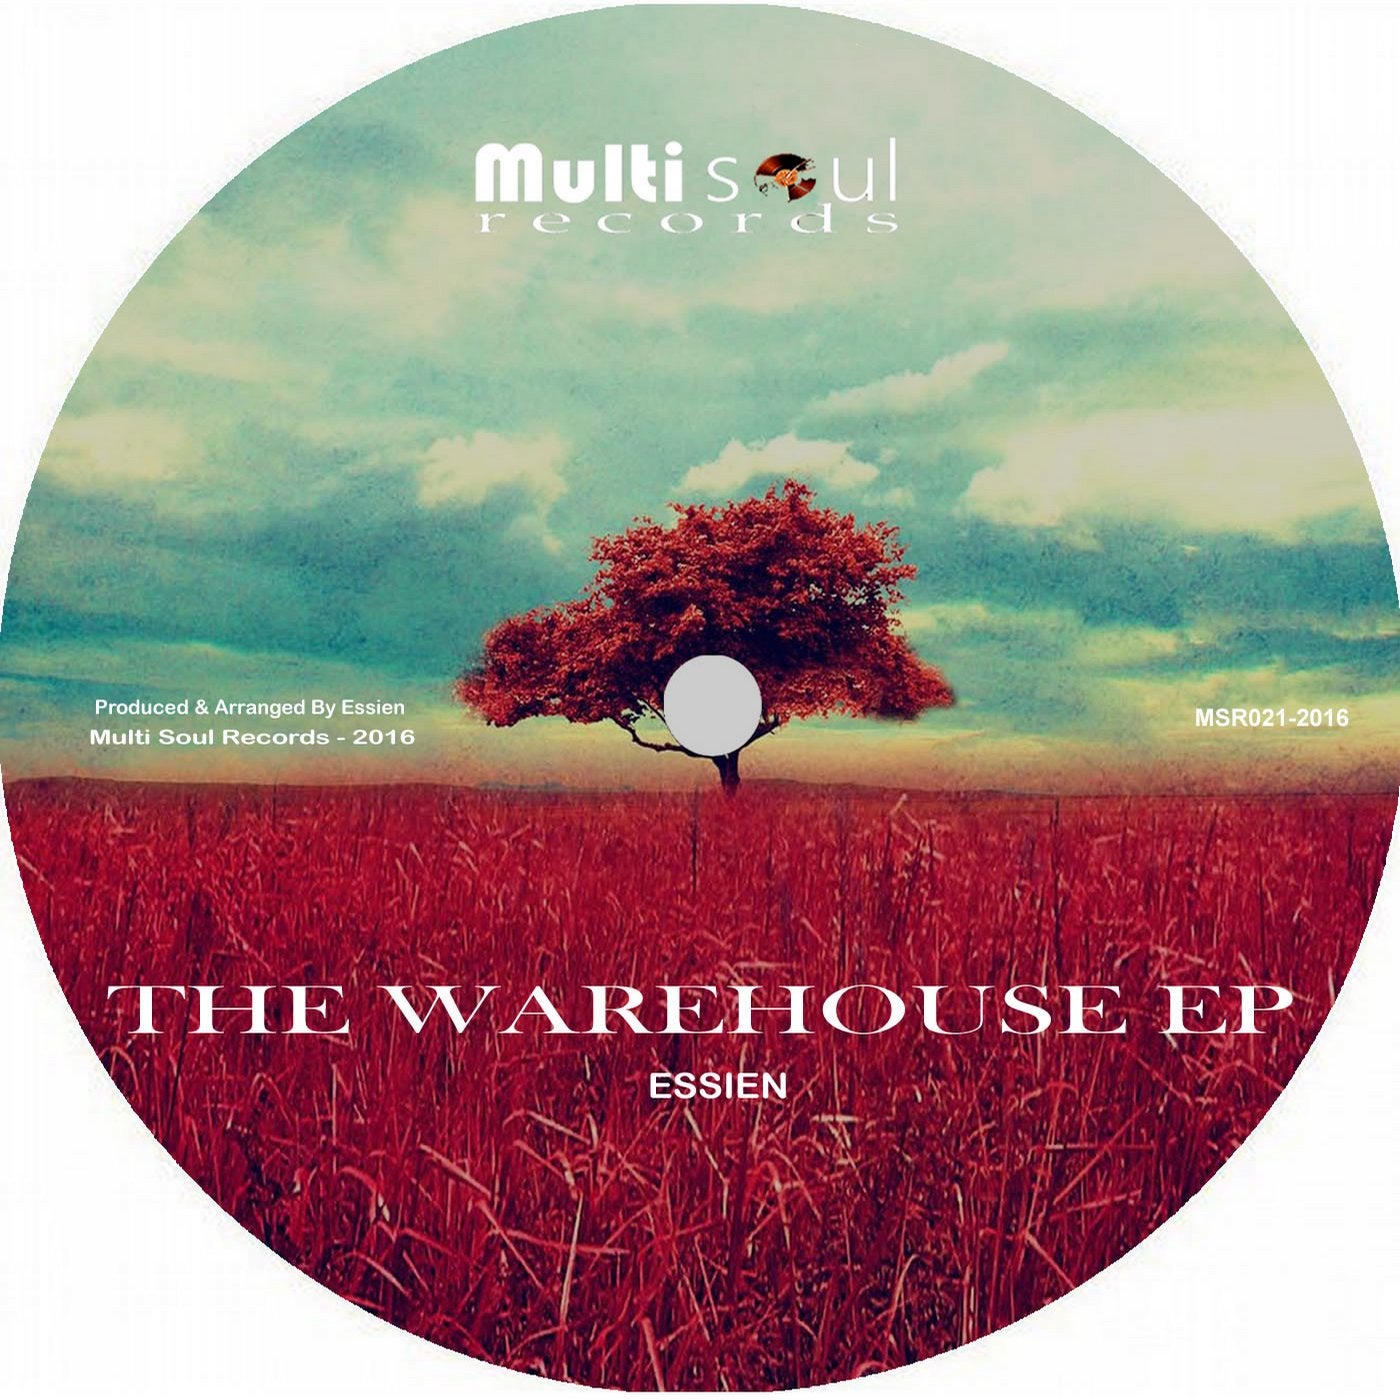 The Warehouse EP